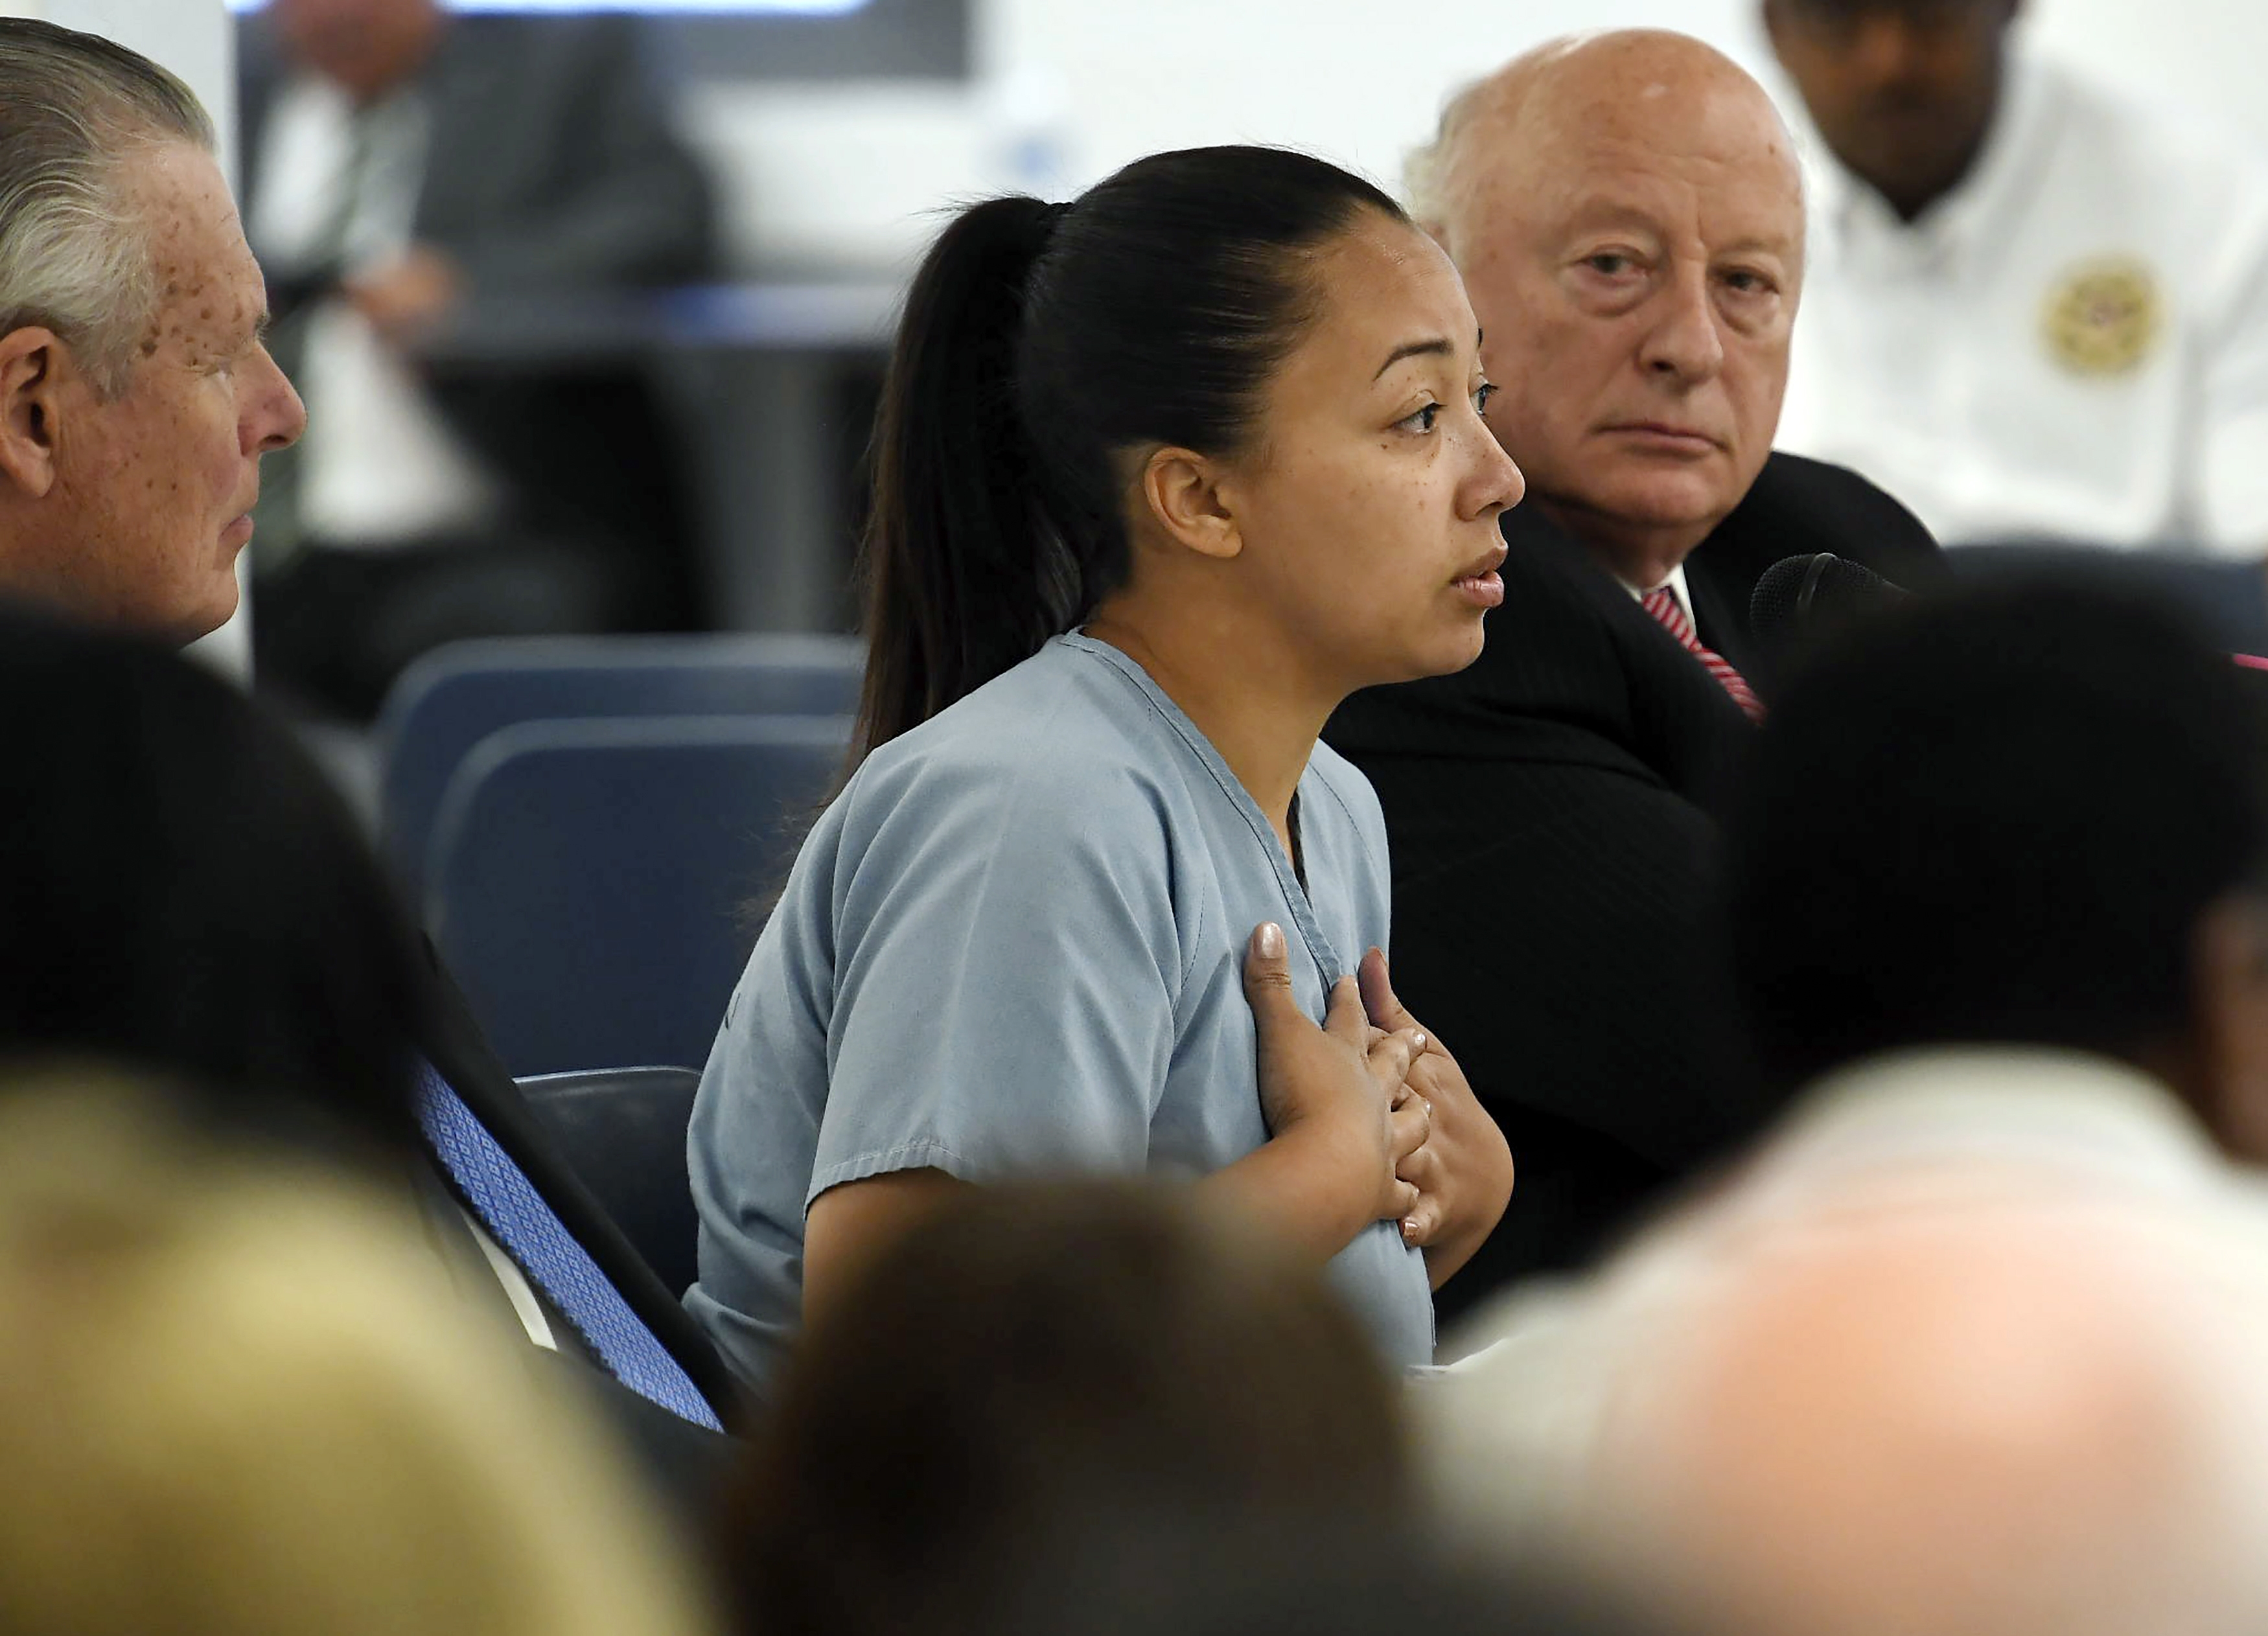 Sentenced to life in prison at 16, Cyntoia Brown will be released next week